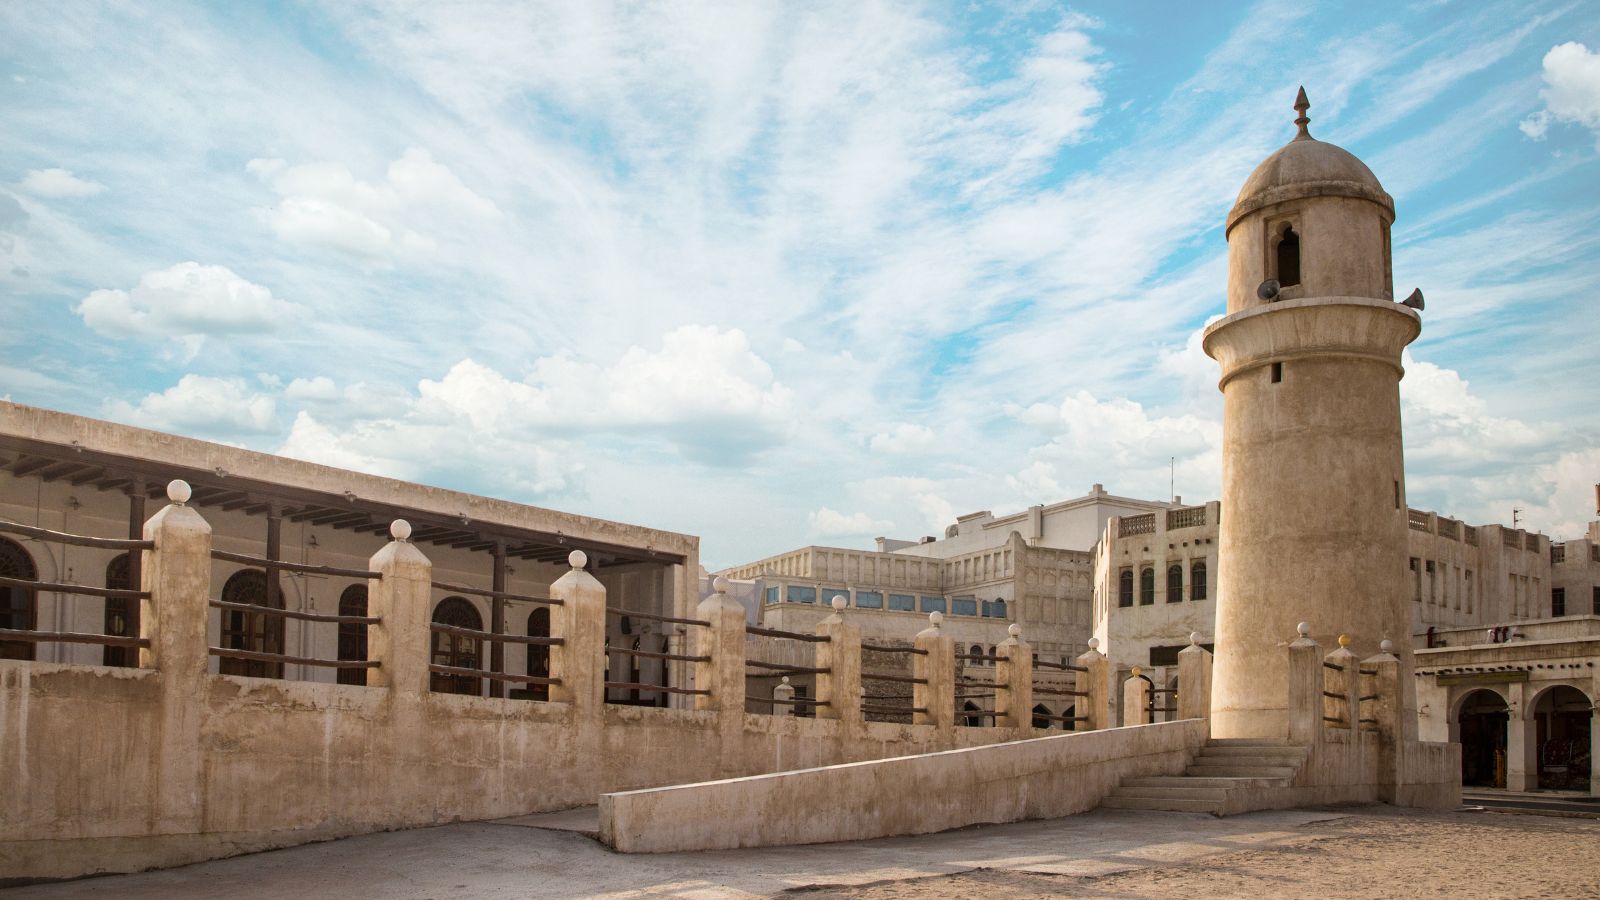 Old historic market and Al Ahmad Mosque in Doha. Islamic religion building, Souq Waqif